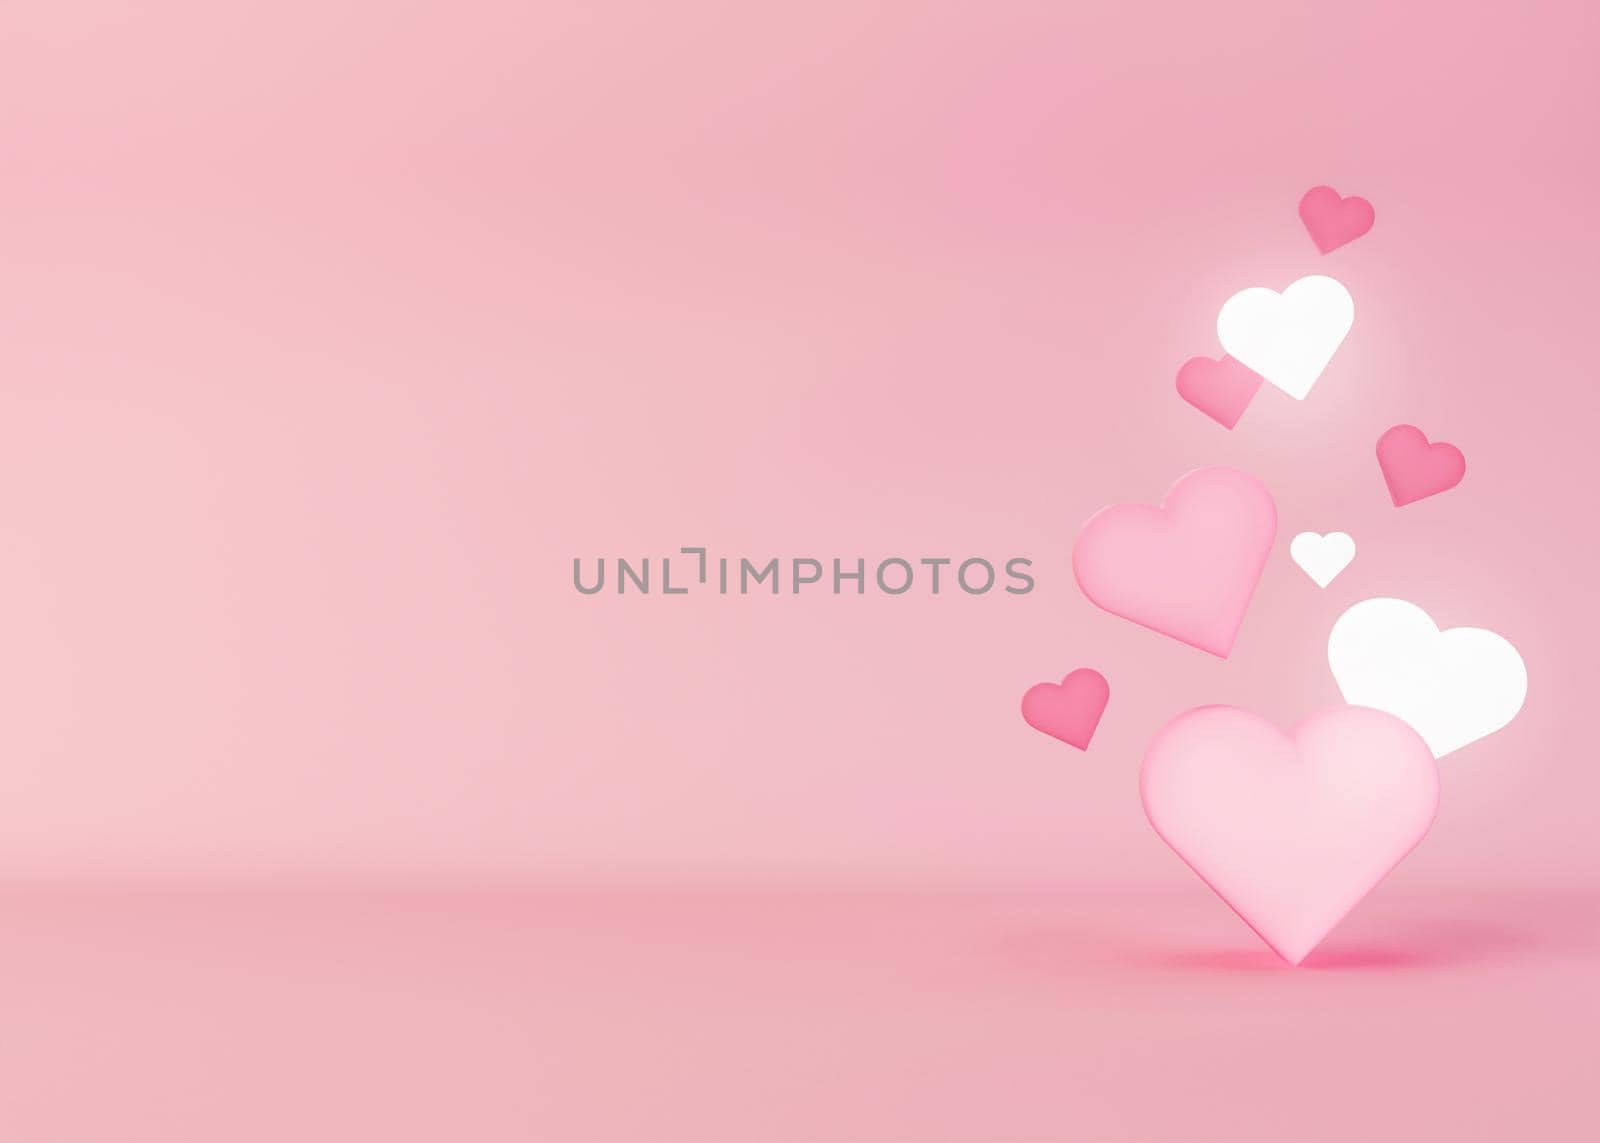 Hearts flying on pink background. Valentine's Day backdrop with free space for text, copy space. Postcard, greeting card design. 3D illustration. Love